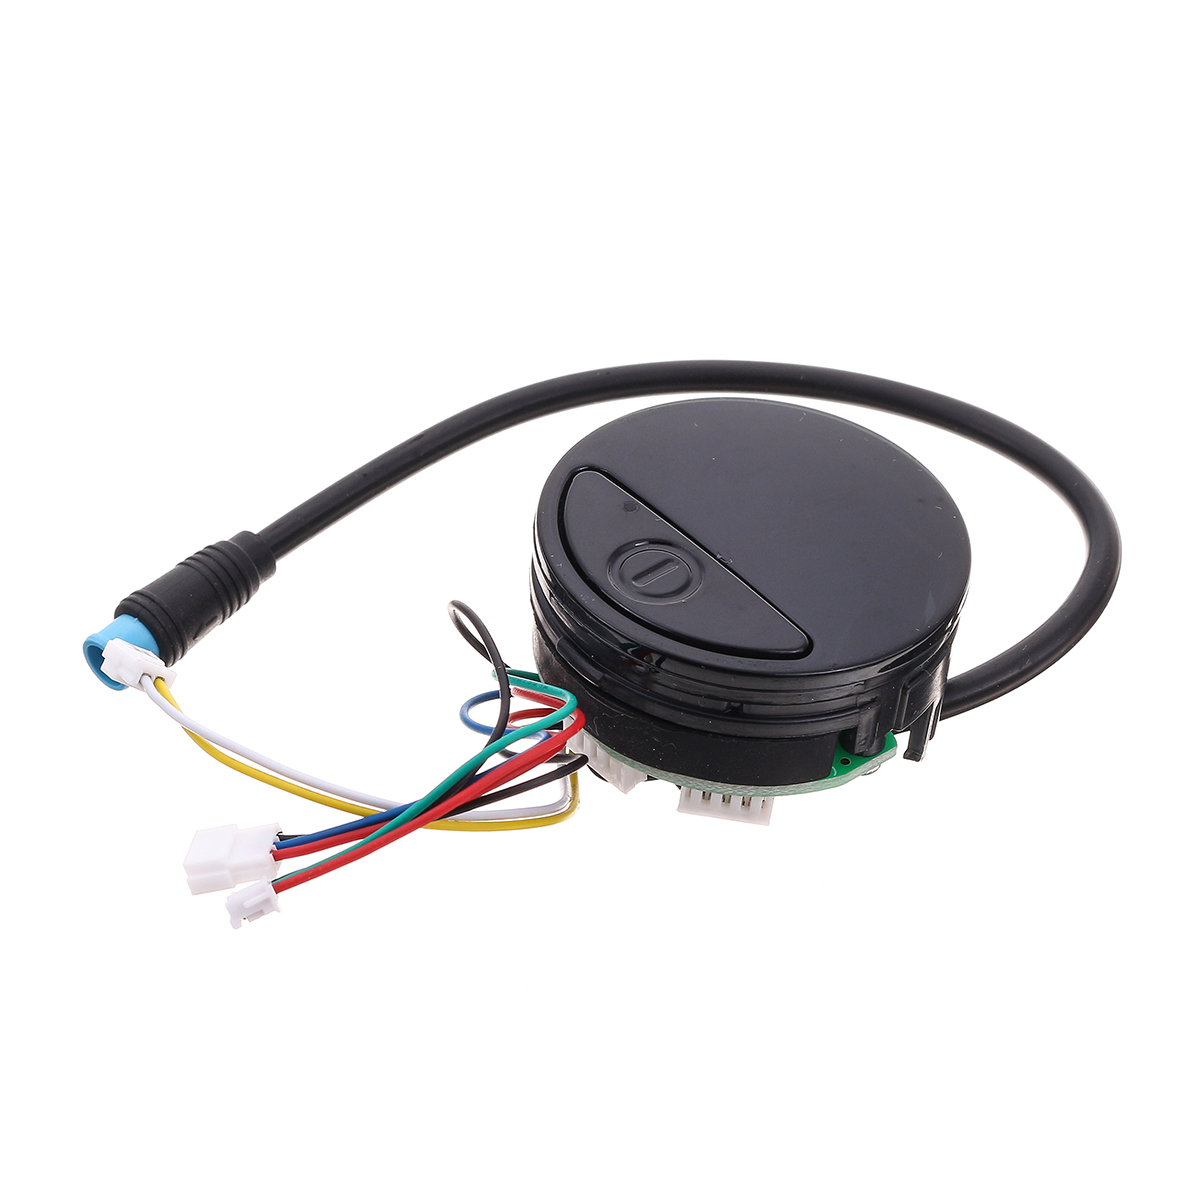 Activated Bluetooth Controller Board Dashboard Charger for Ninebot ES1 ES2 ES3 ES4 Scooter - Auto GoShop